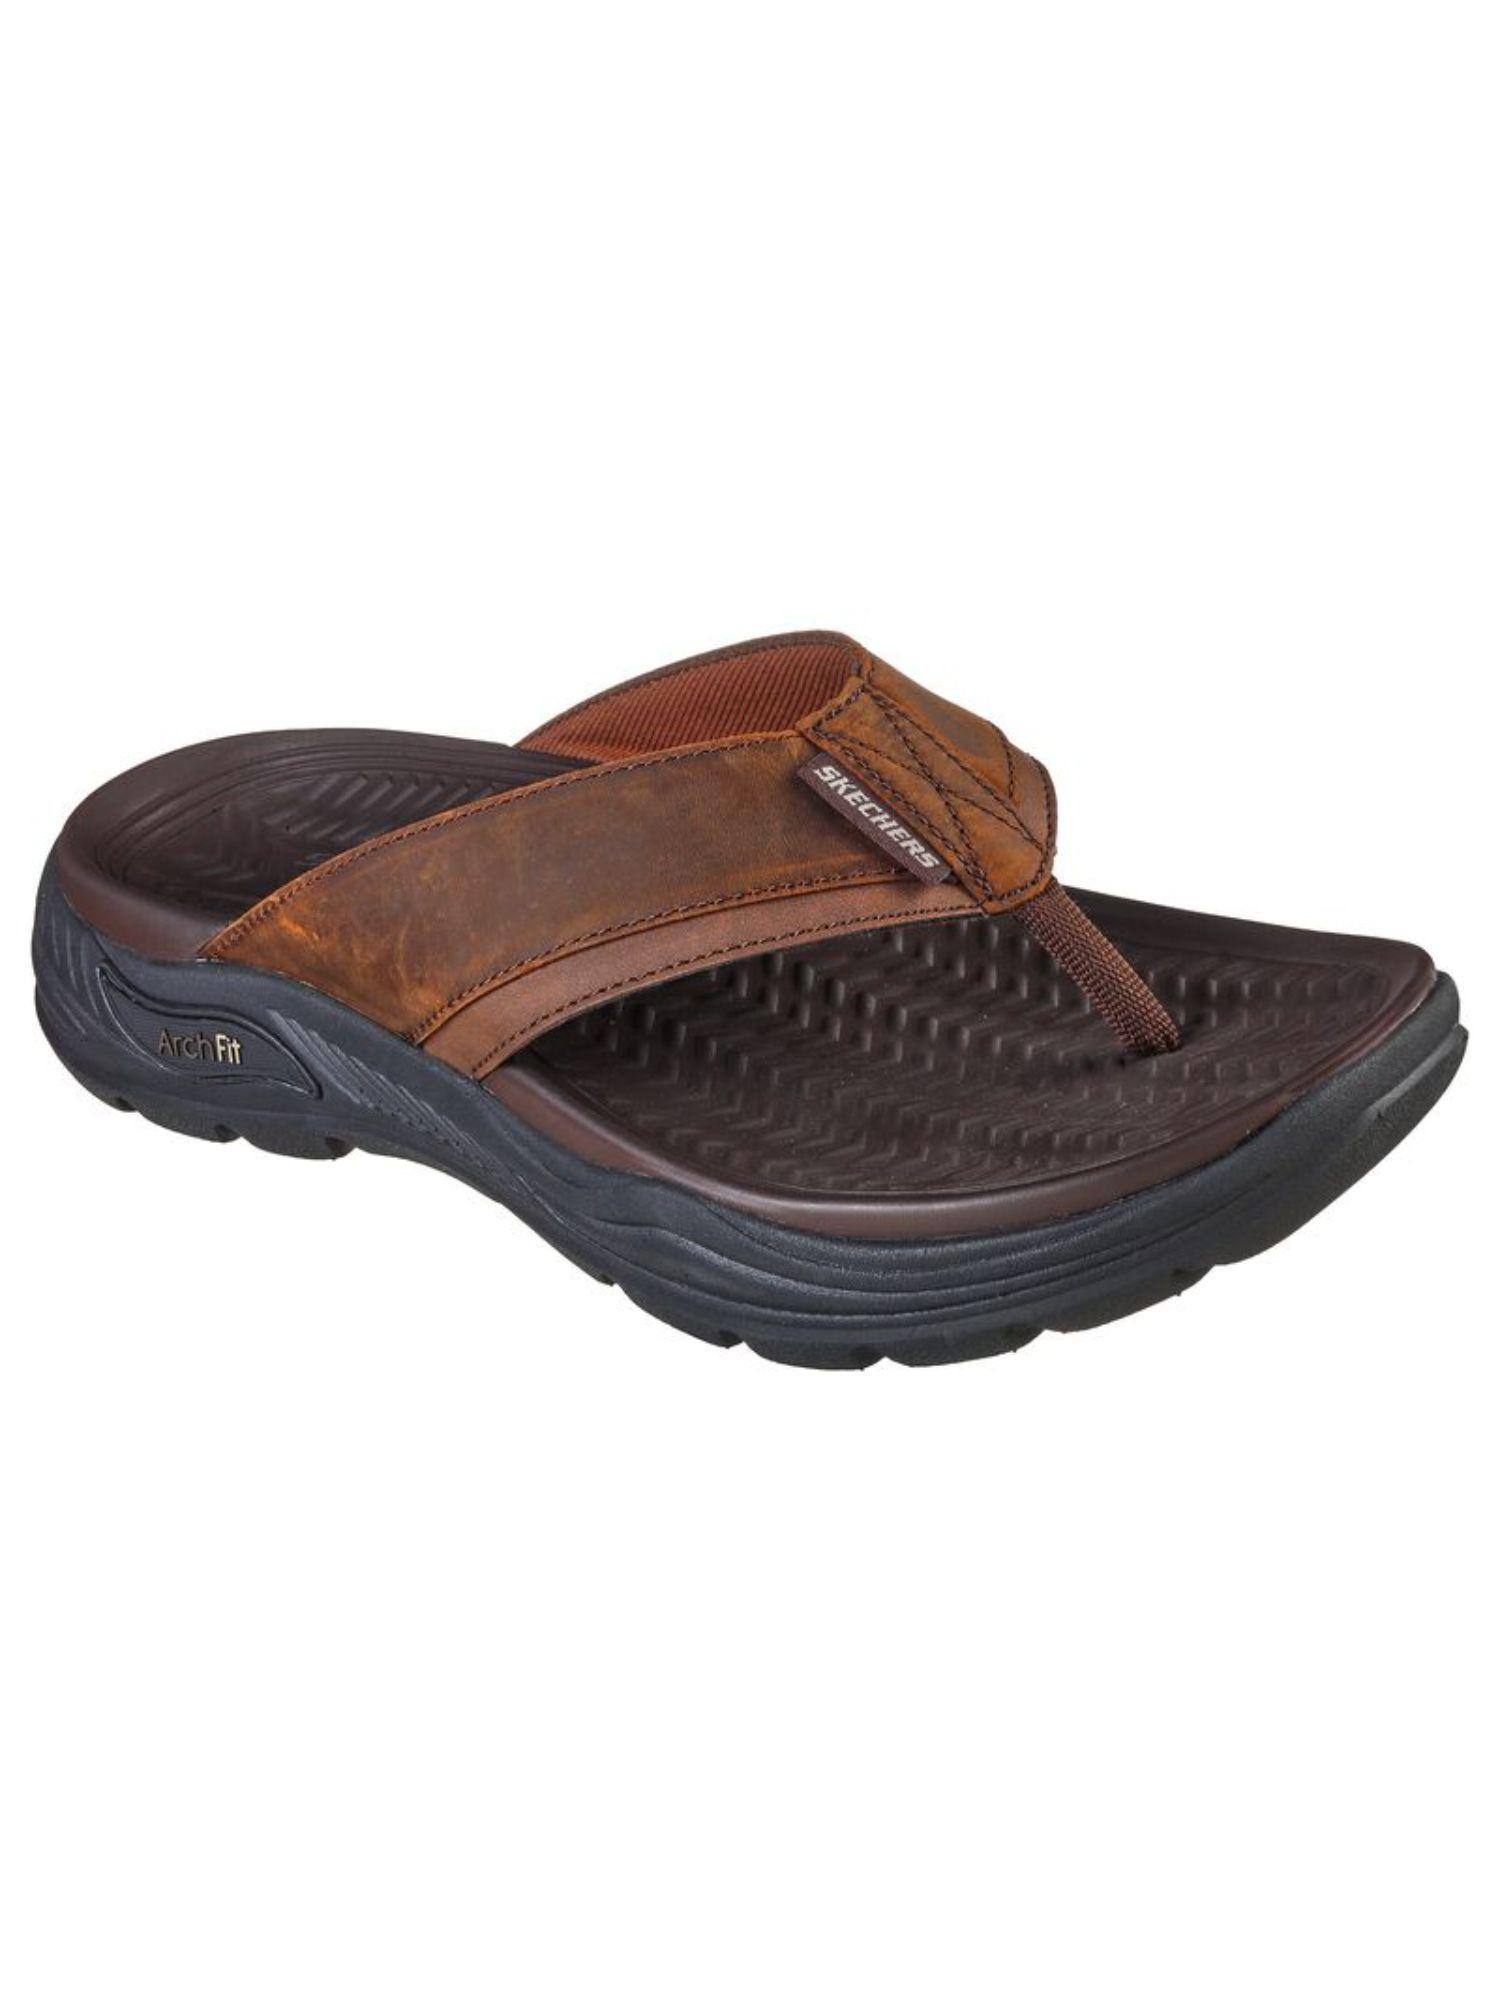 arch fit motley sd - malico brown mens usa flip flops